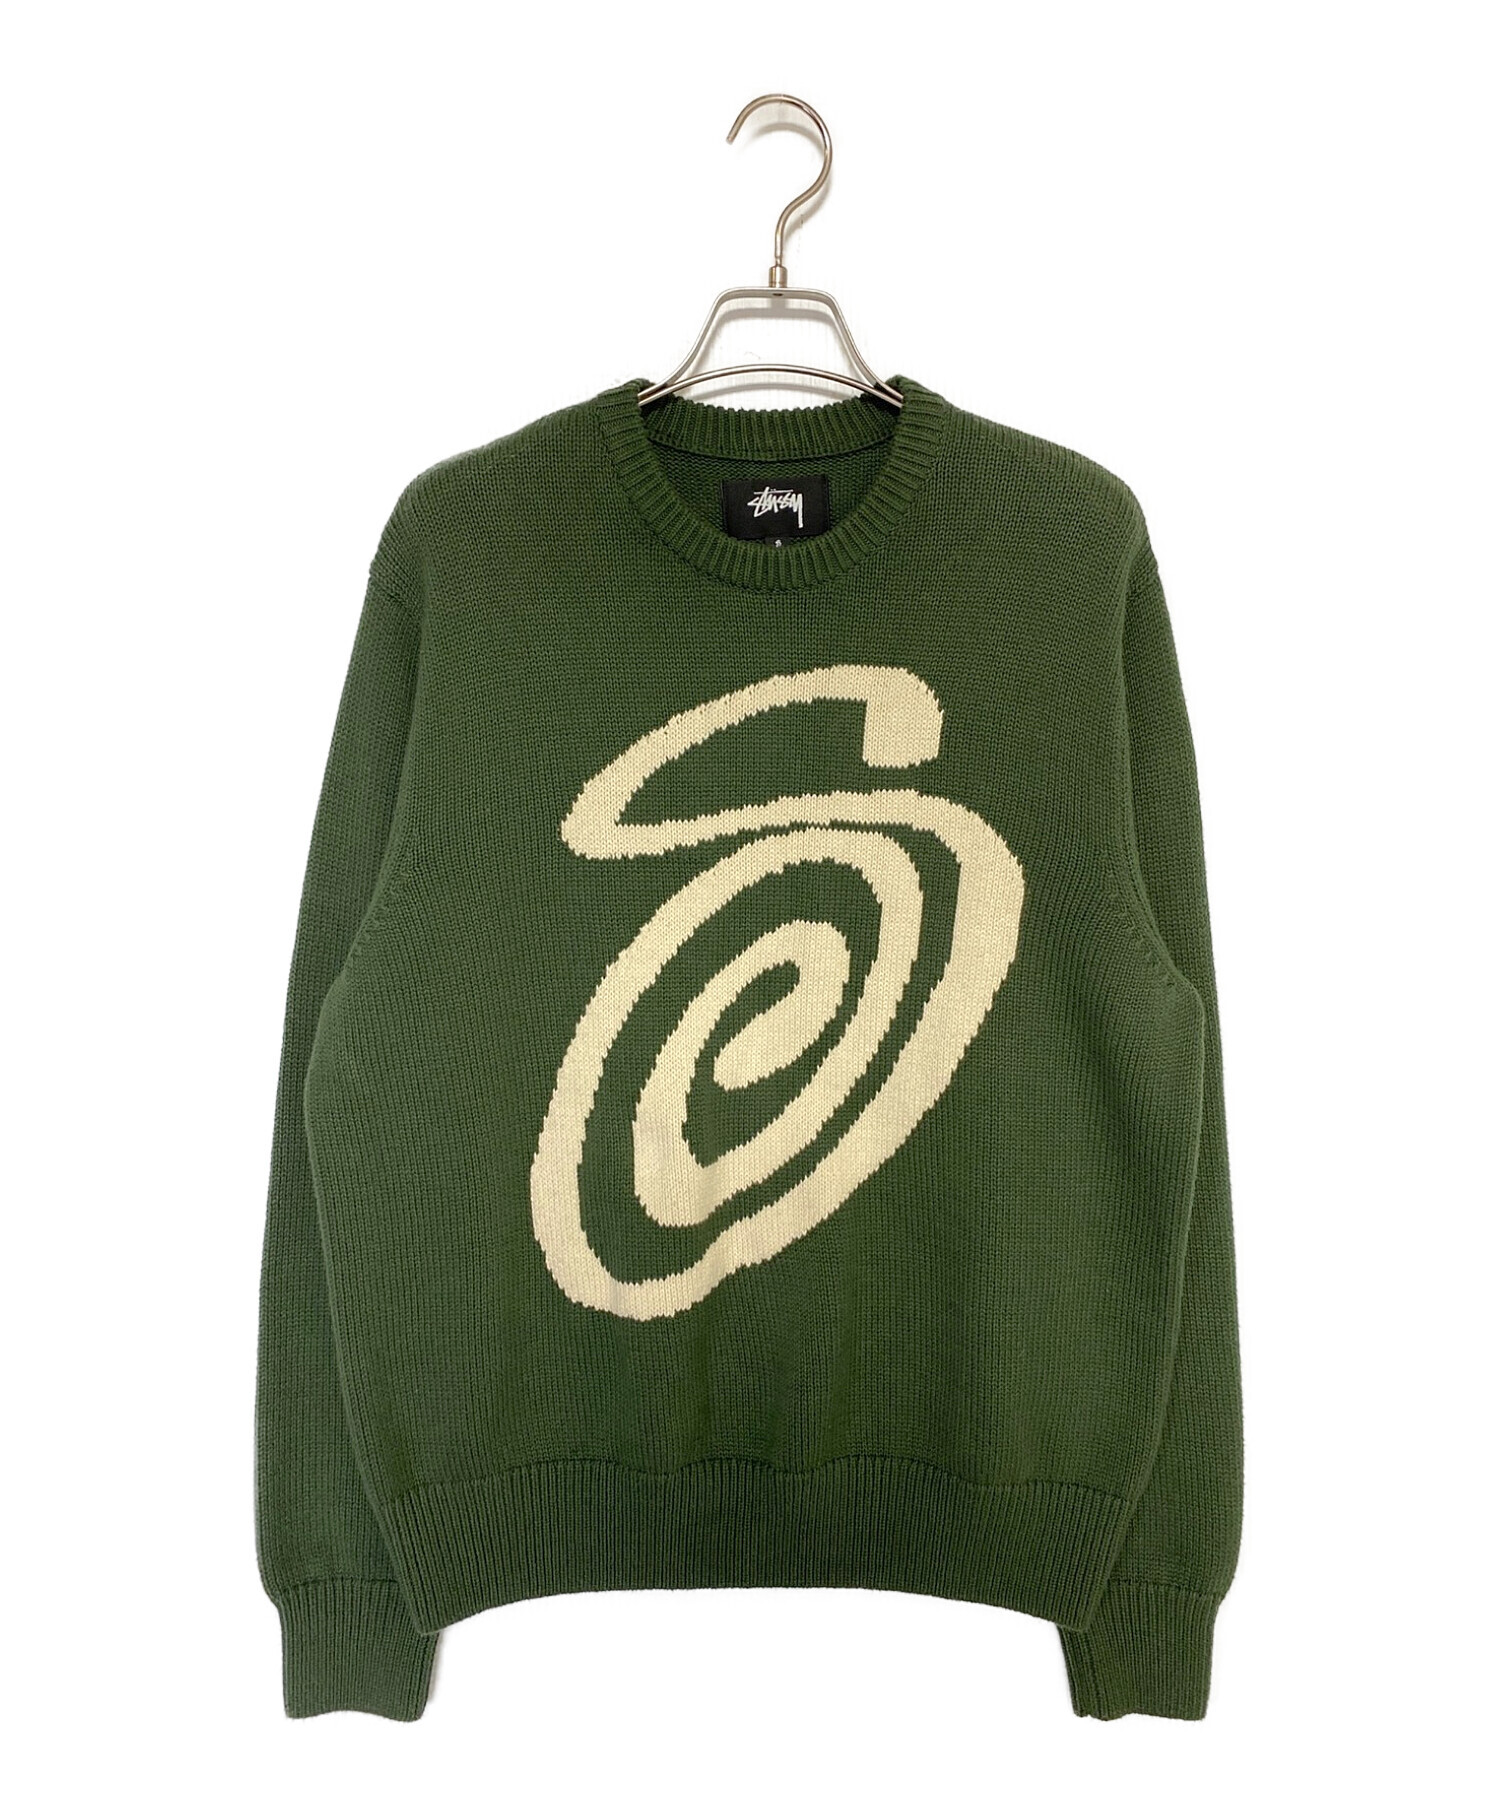 STUSSY CURLY S SWEATERニットブラックS